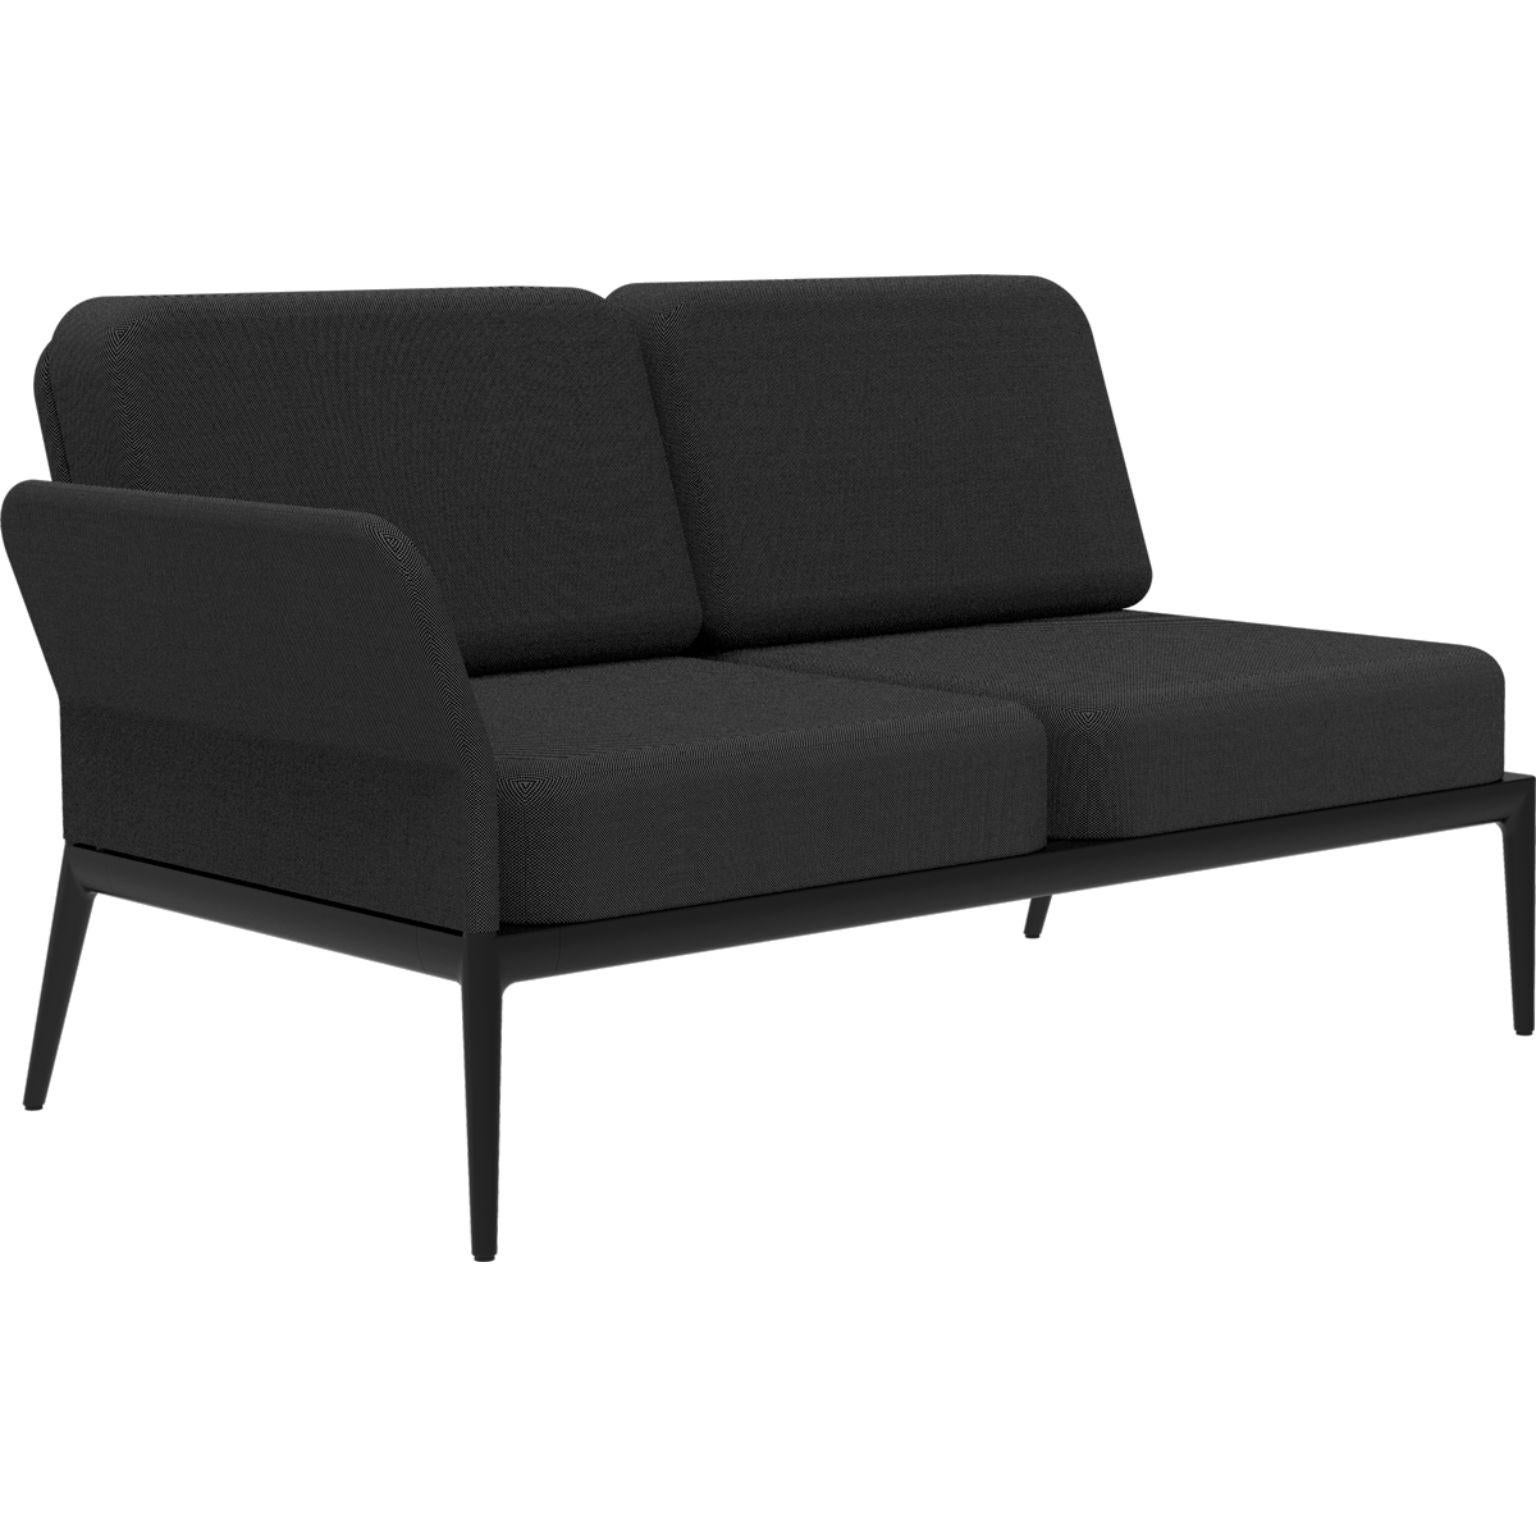 Cover Black Double Right Modular Sofa by MOWEE
Dimensions: D83 x W148 x H81 cm (seat height 42 cm).
Material: Aluminum and upholstery.
Weight: 29 kg.
Also available in different colors and finishes. 

An unmistakable collection for its beauty